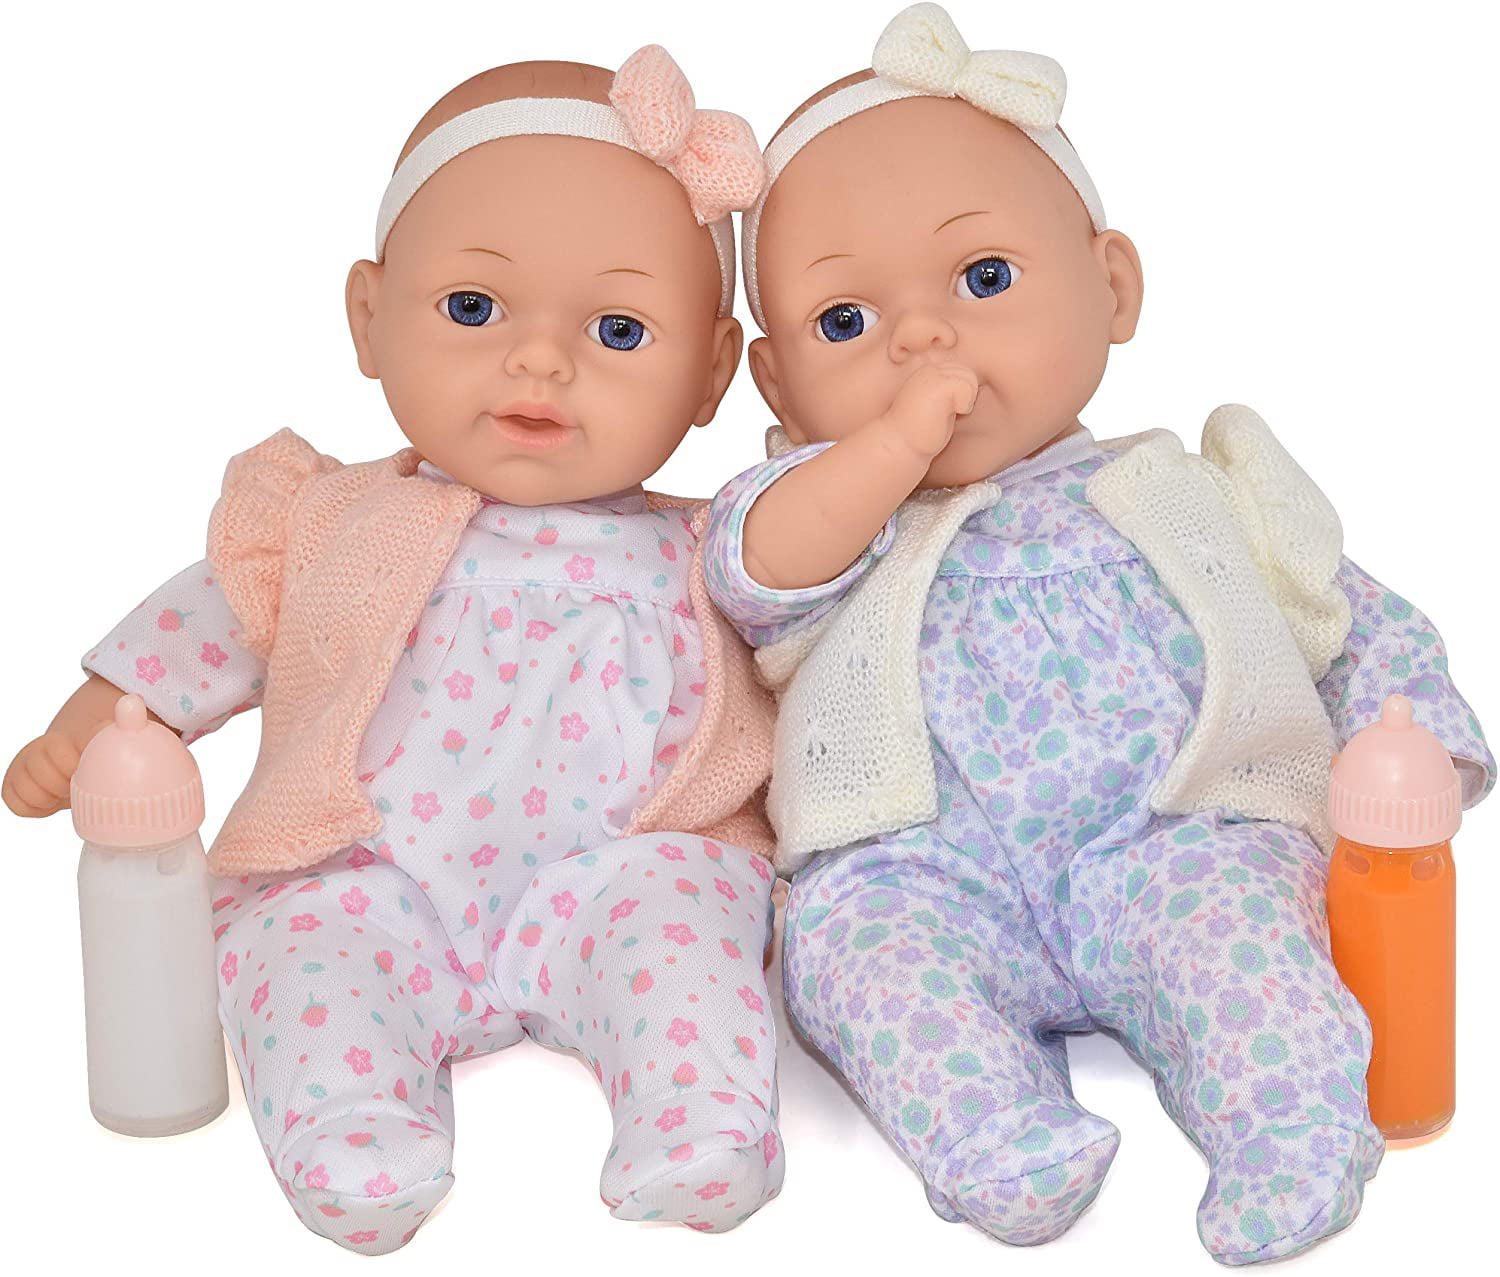 13 Inch Soft Body Baby Dolls with Magic Disappearing Milk Bottle and Juice Bottle Twin Baby Dolls 